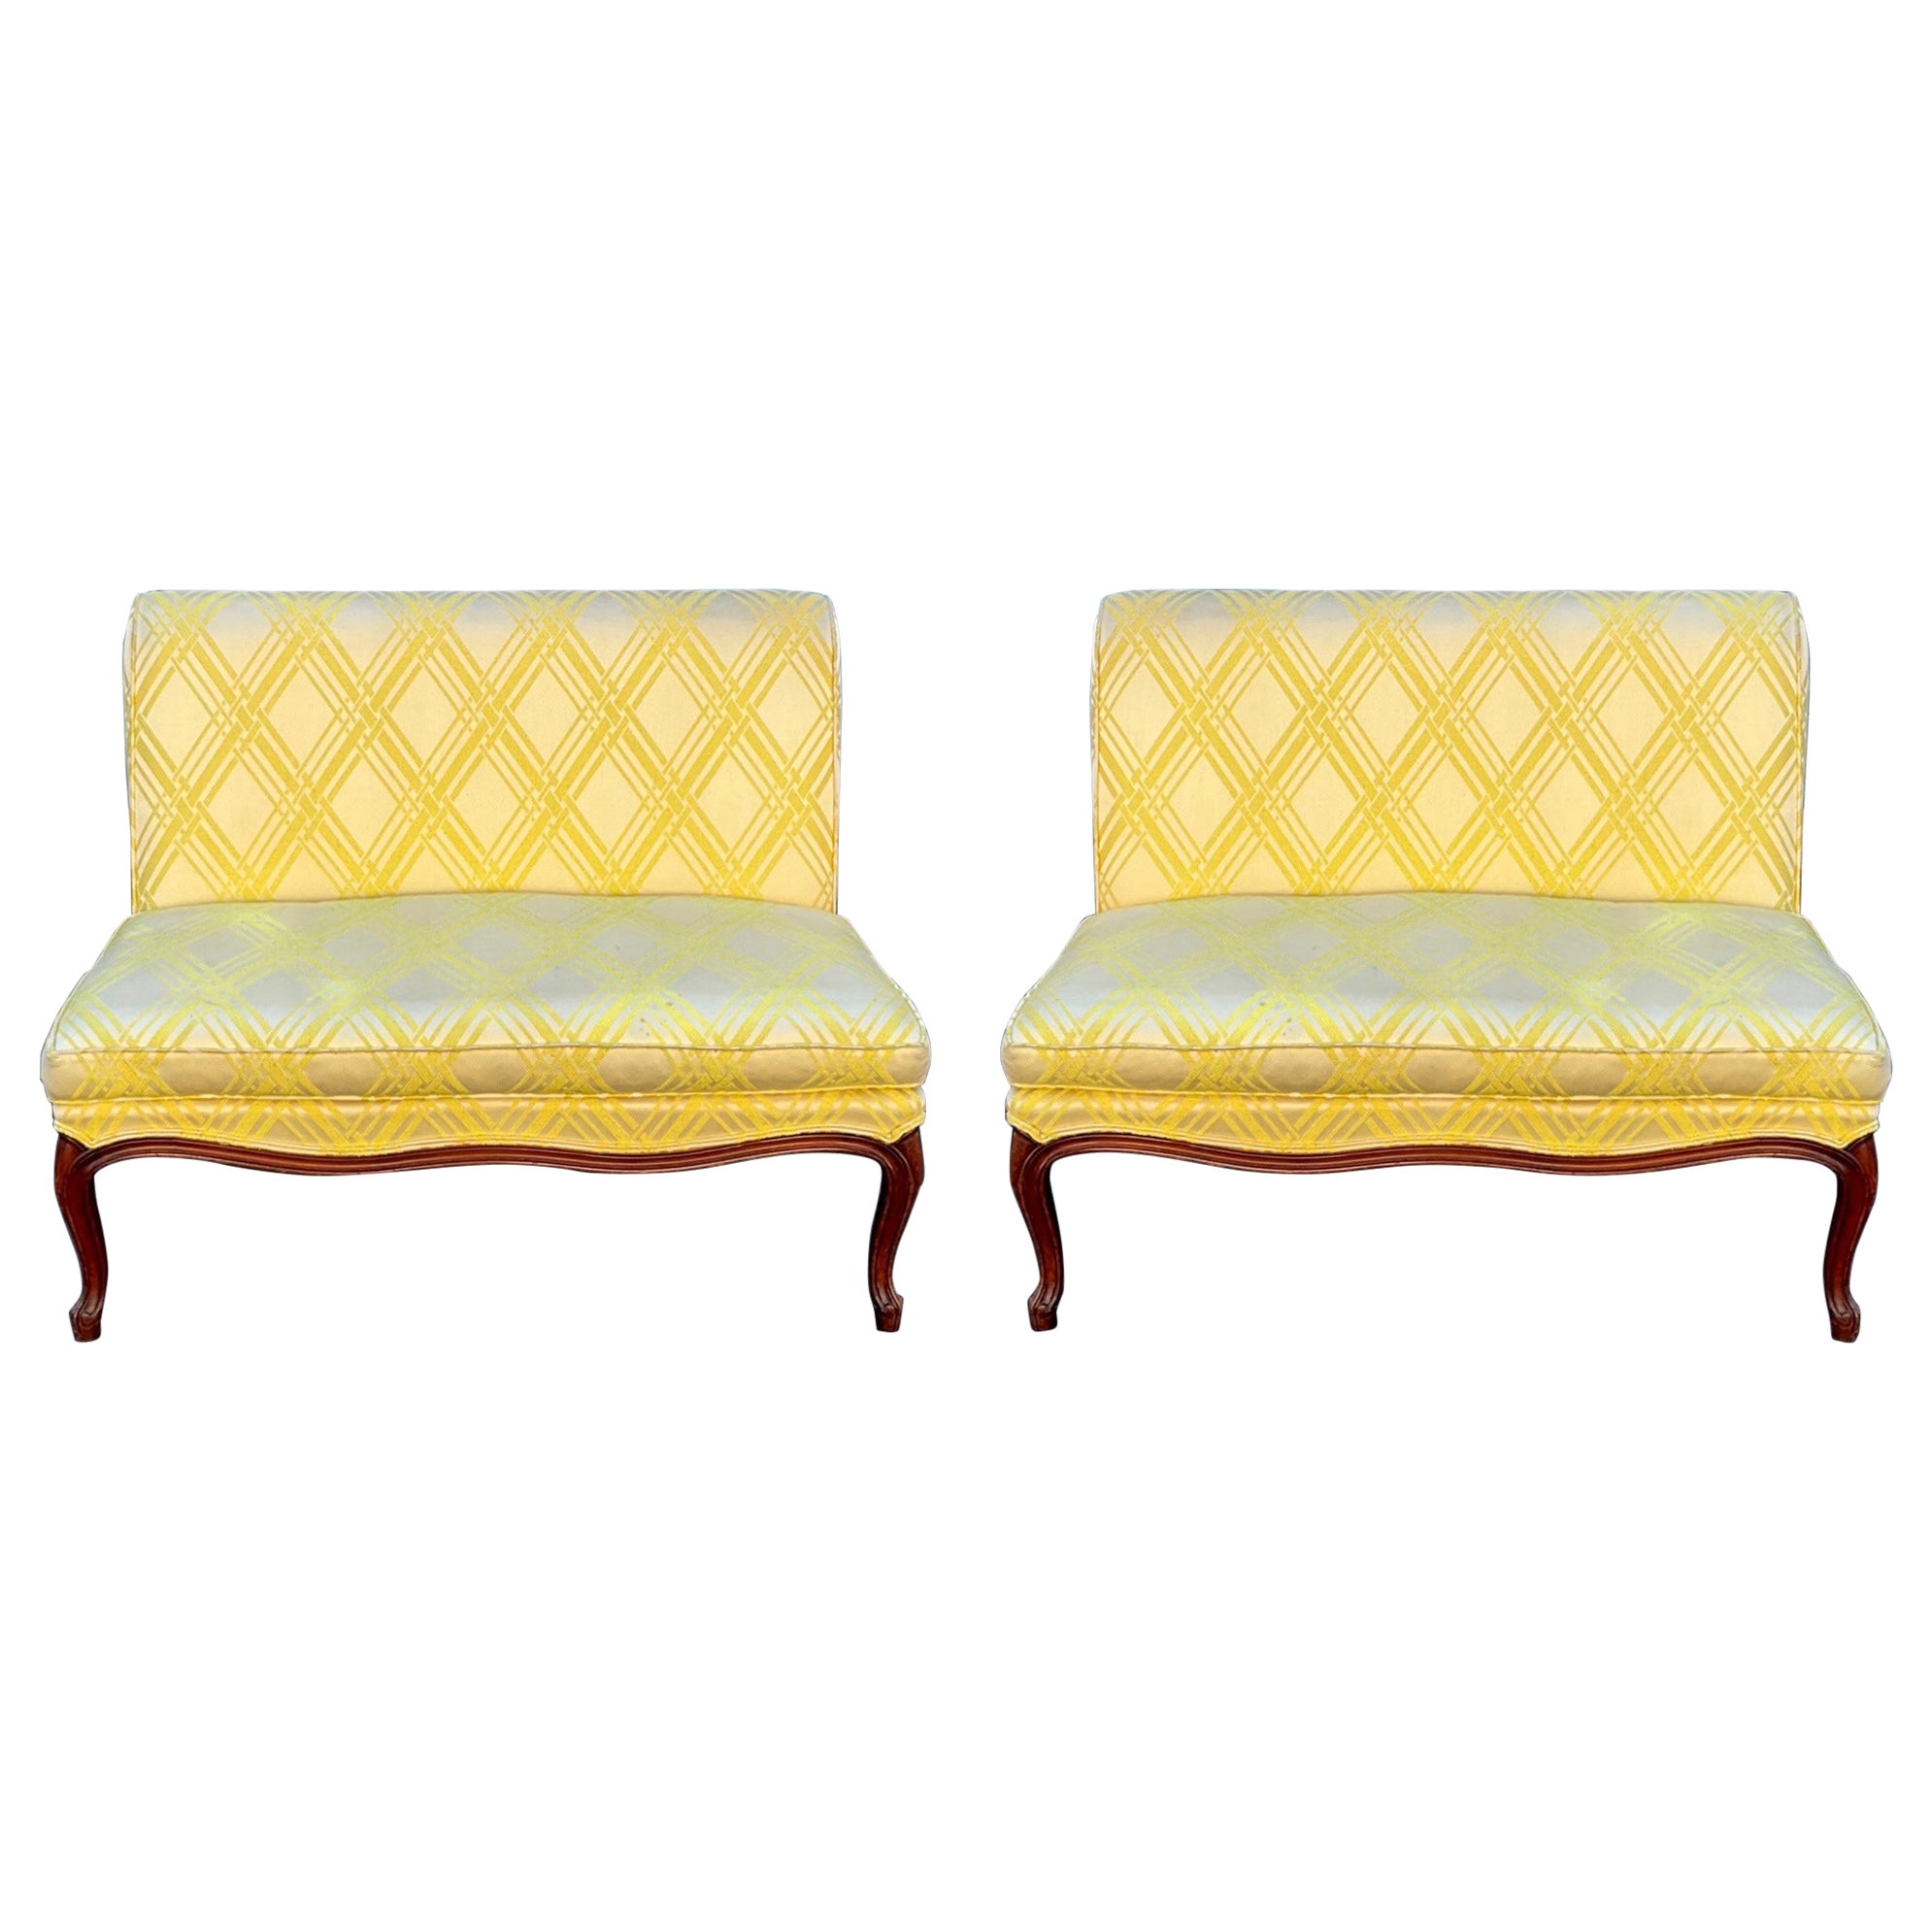 Midcentury French Provincial Style Settees in Regency Yellow, Pair For Sale